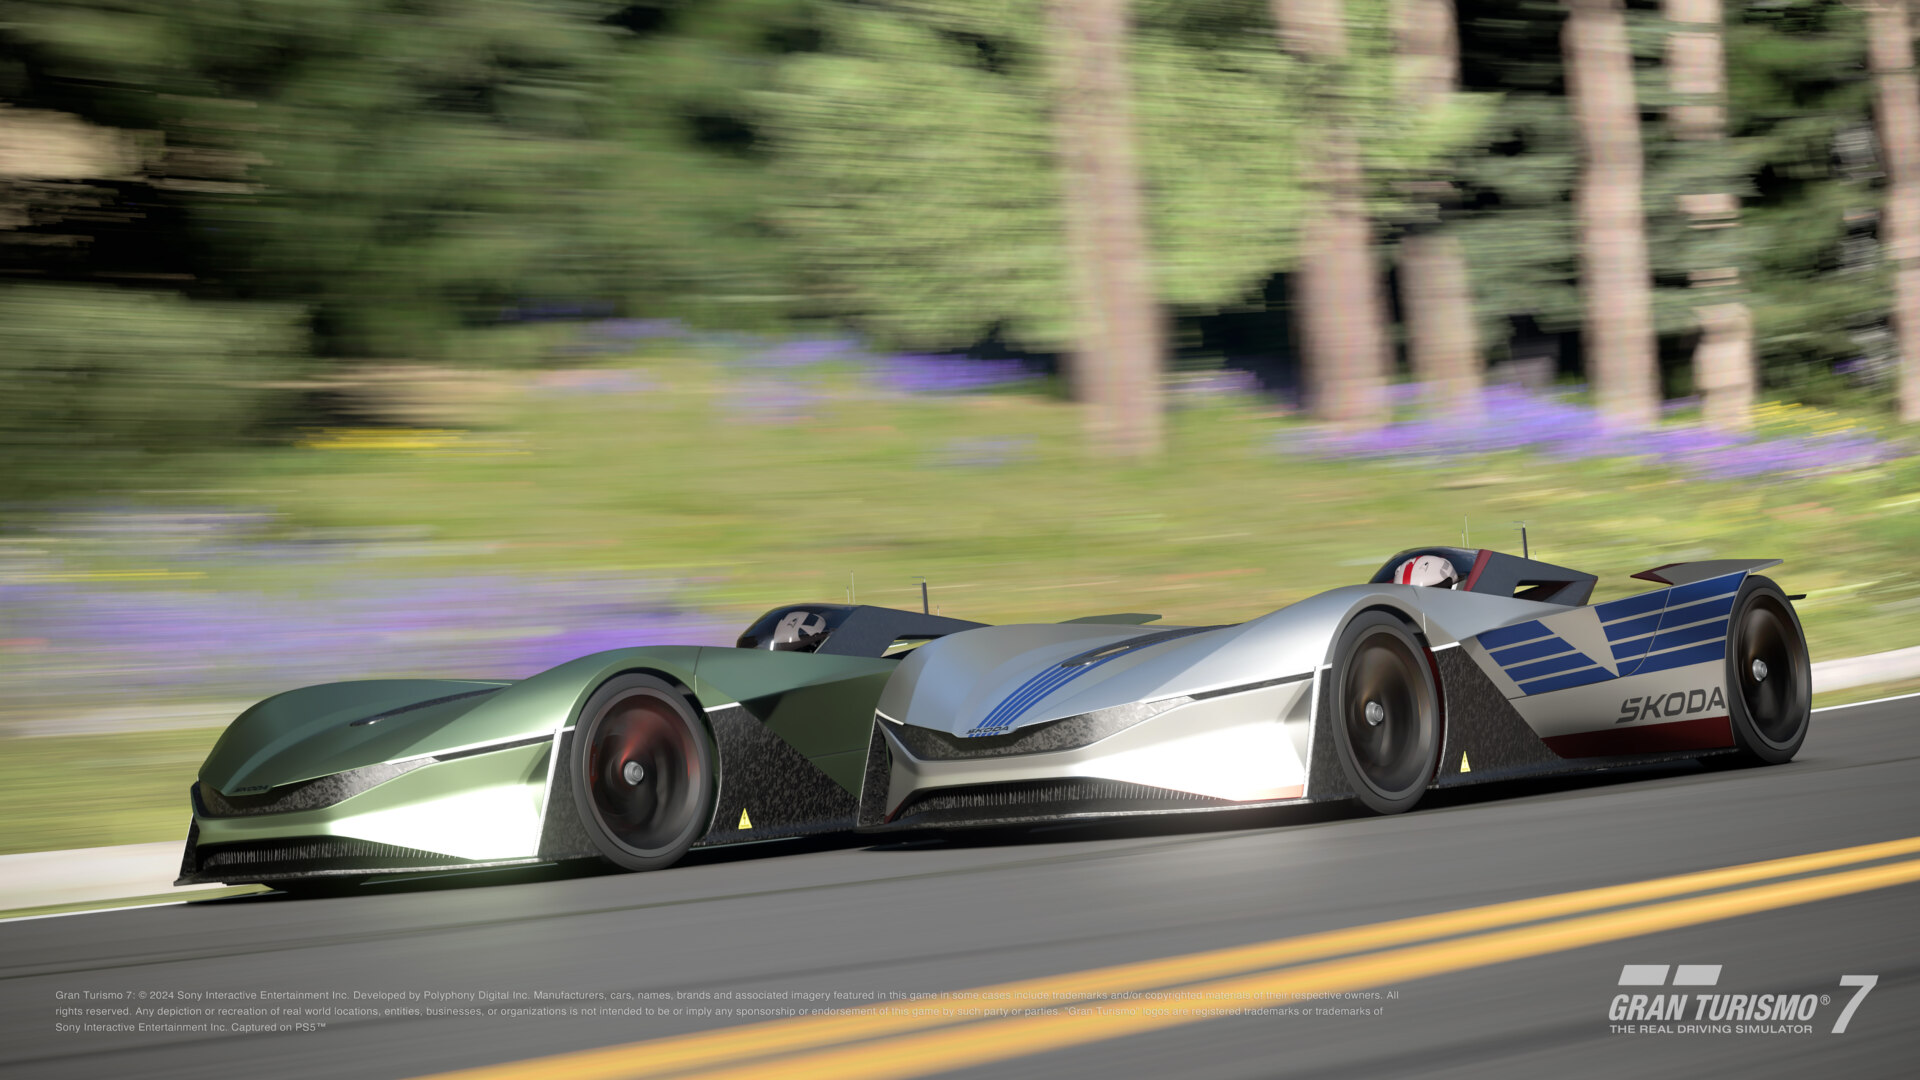 An in-game photo of two Skoda Vision GTs racing side by side. Taken on Gran Turismo 7.